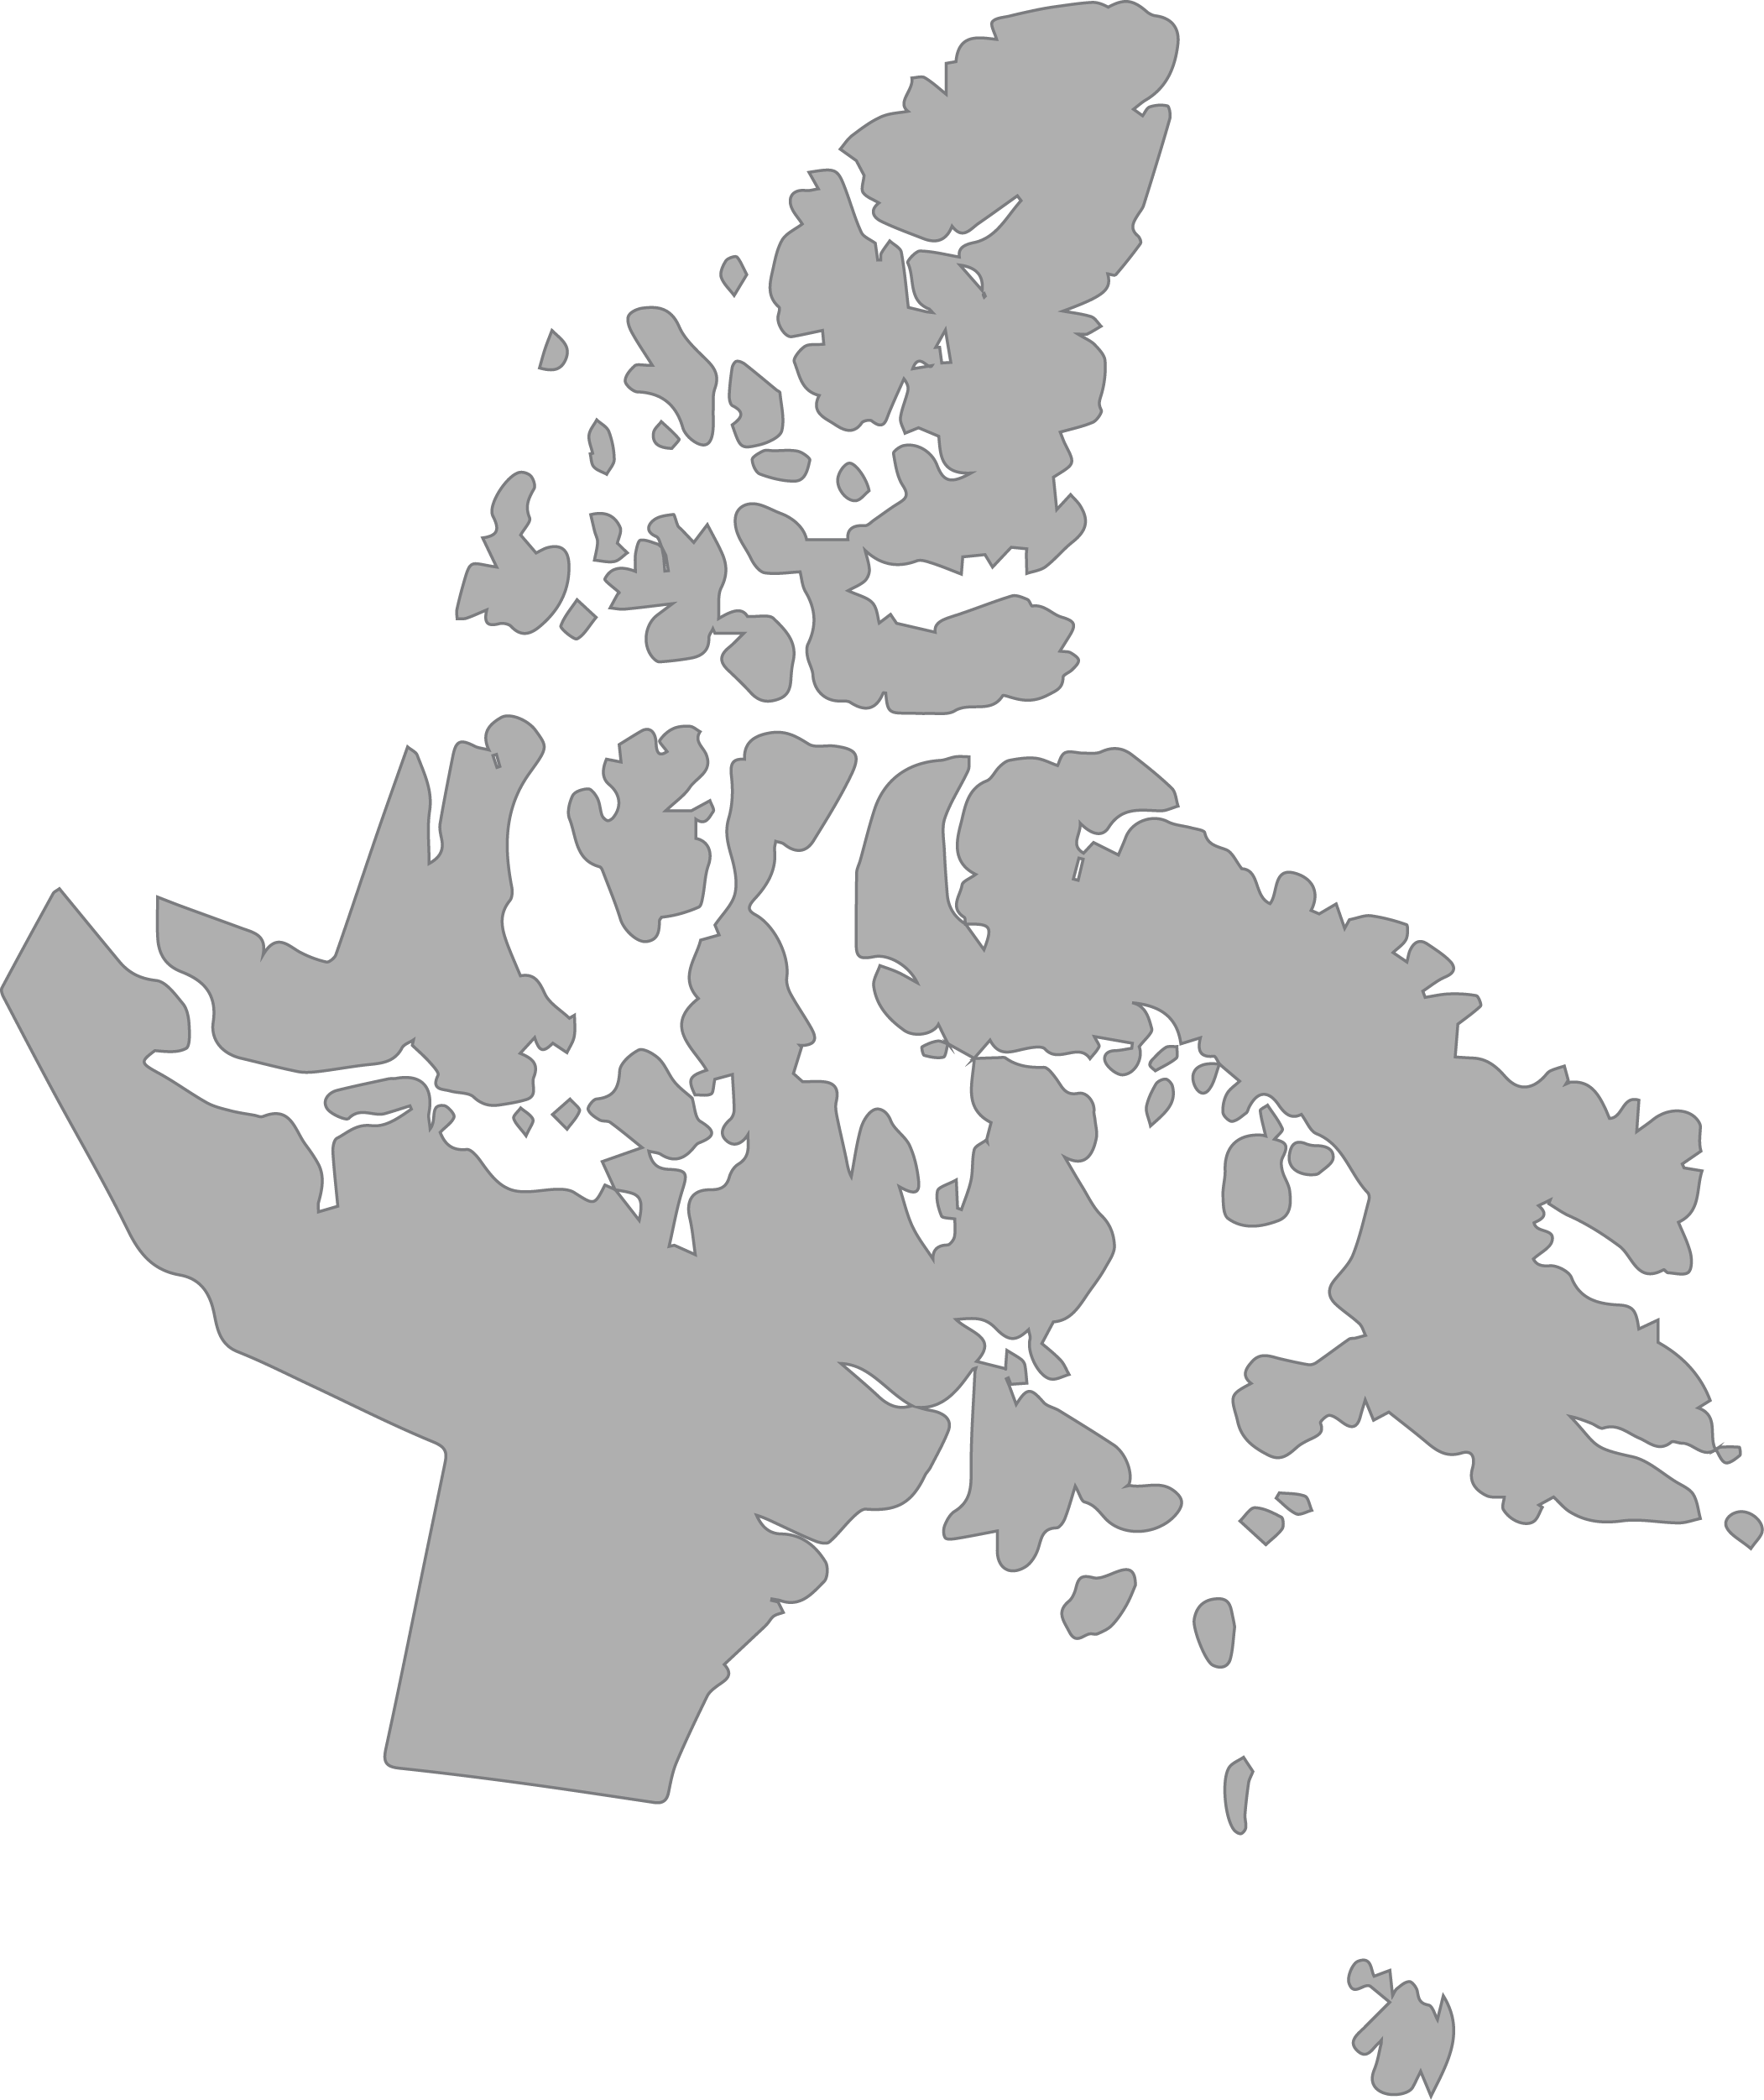 Outlined map of Nunavut